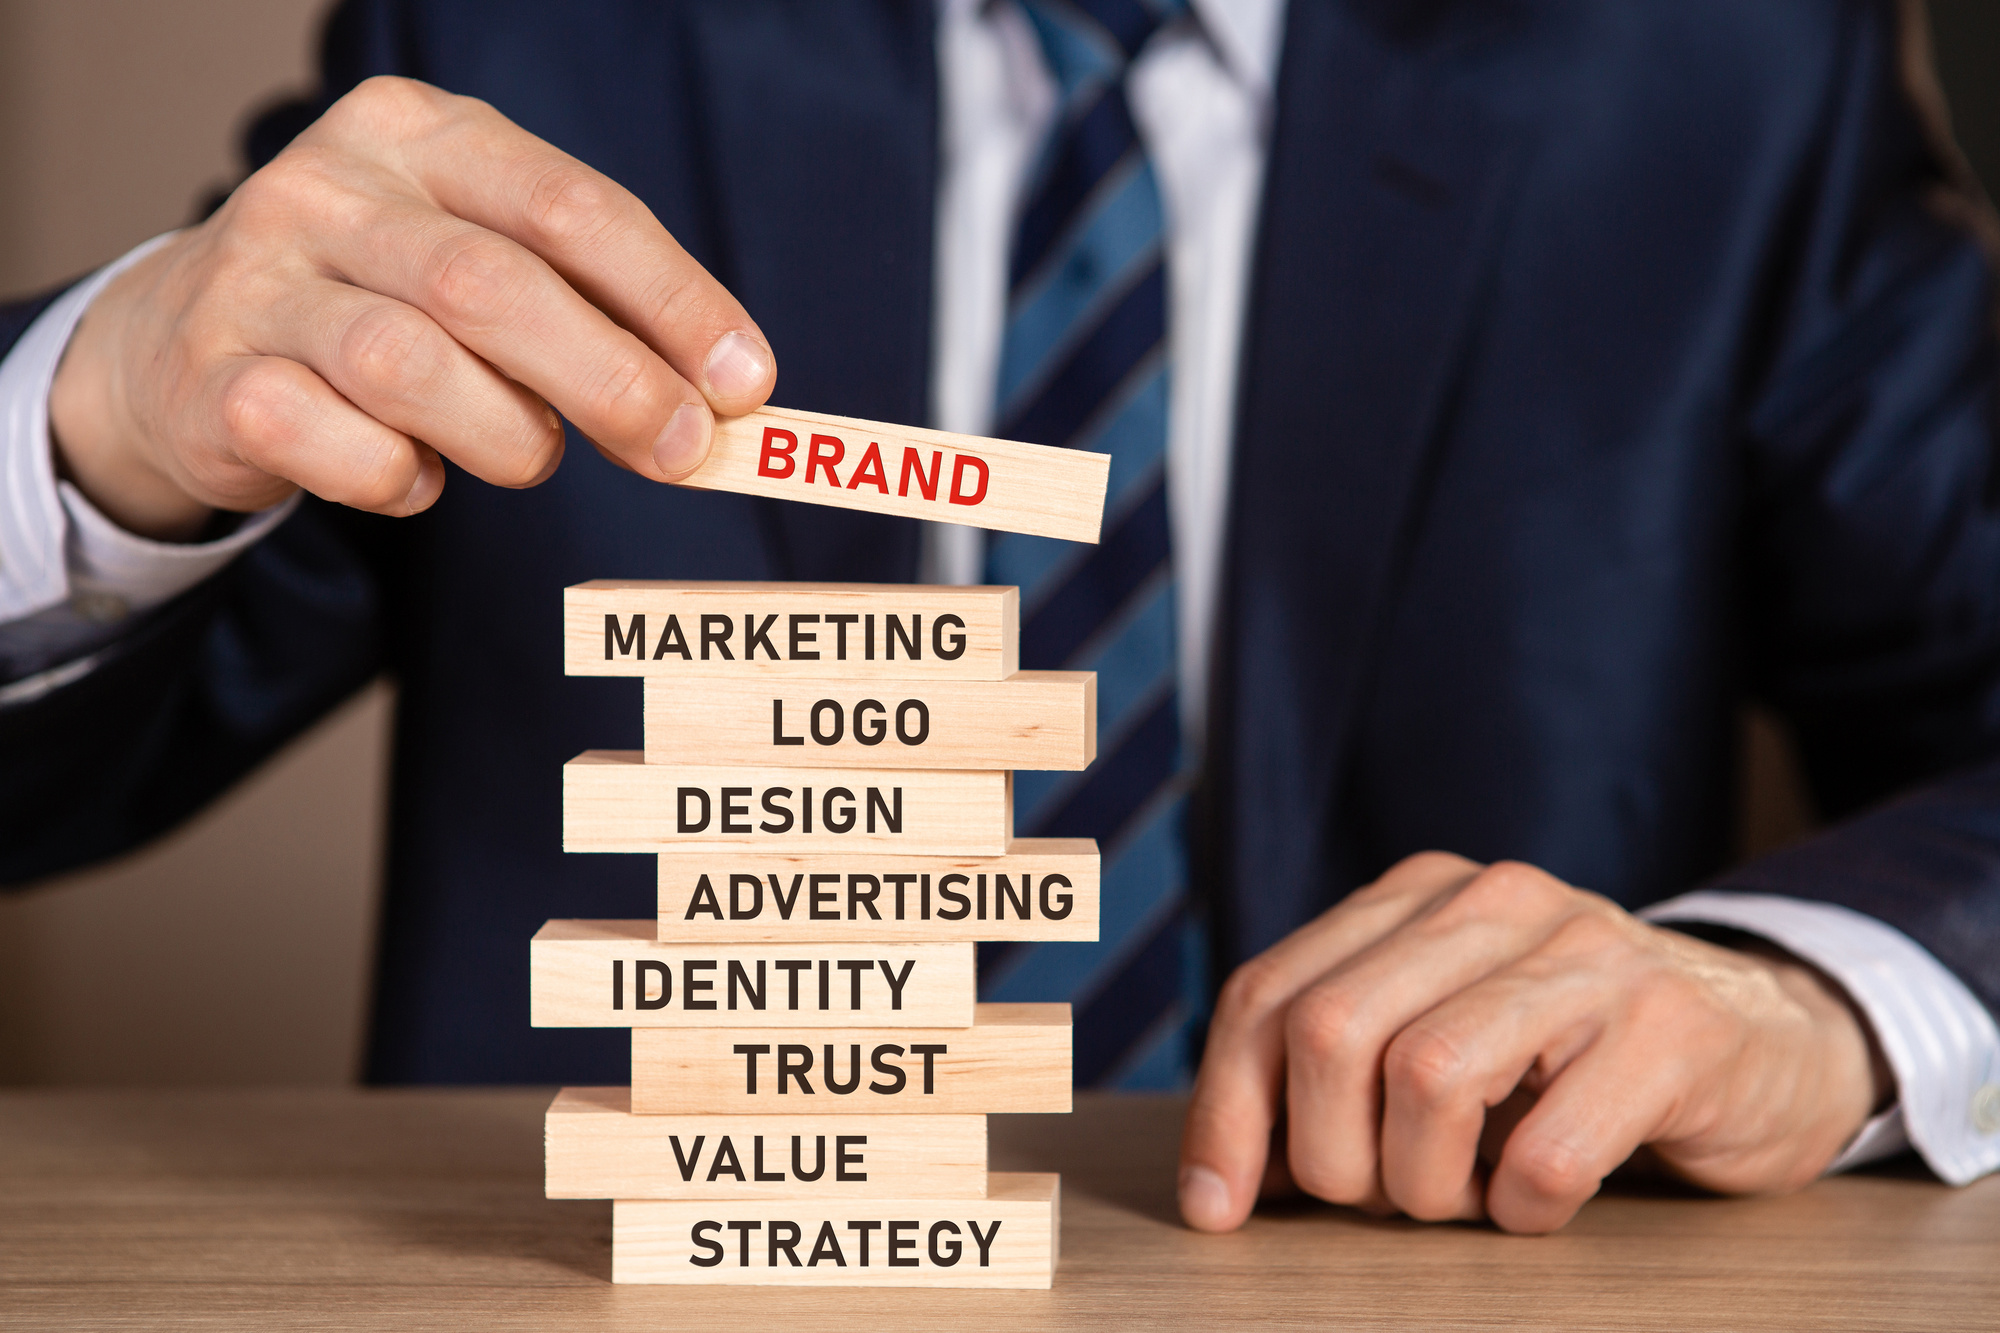 Building Trust And Credibility With Online Branding | DMC